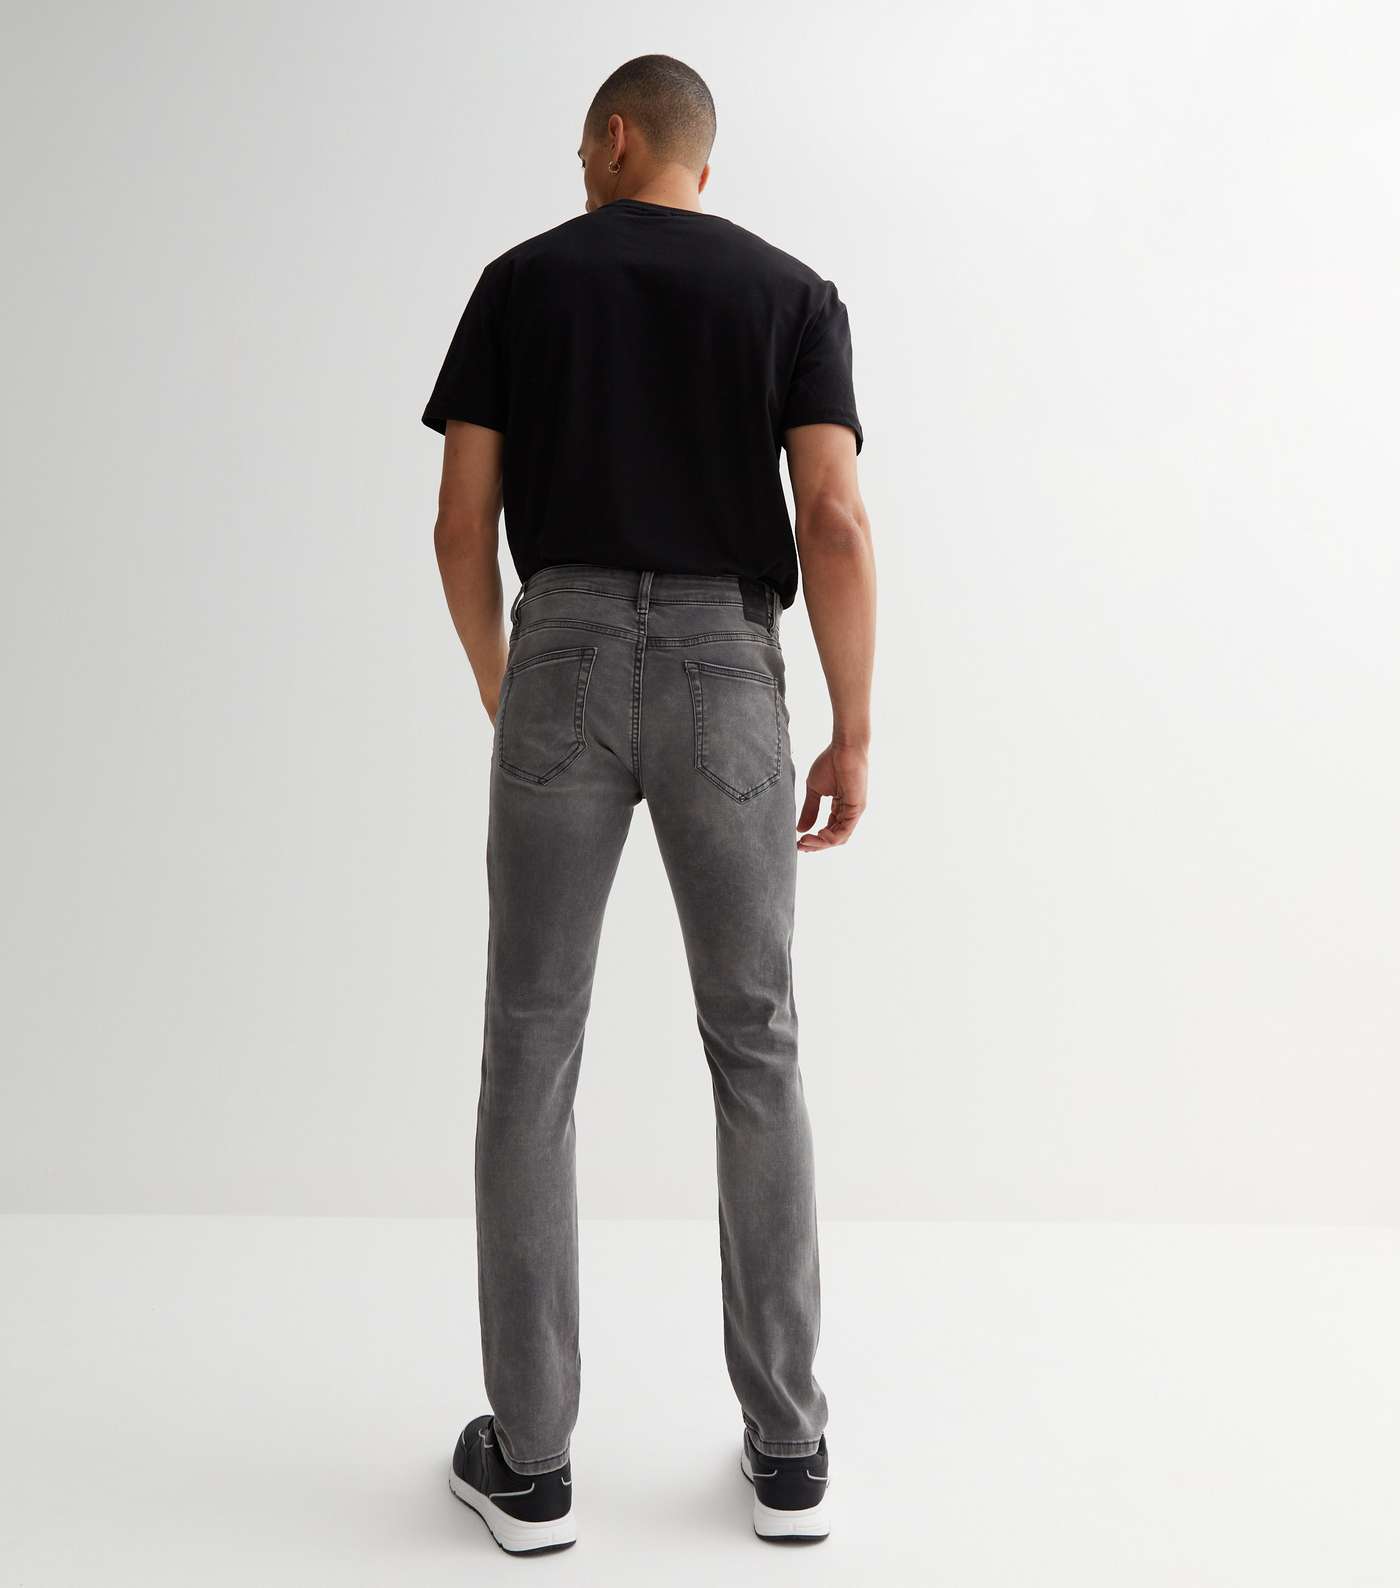 Only & Sons Dark Grey Slim Fit Jeans Image 4